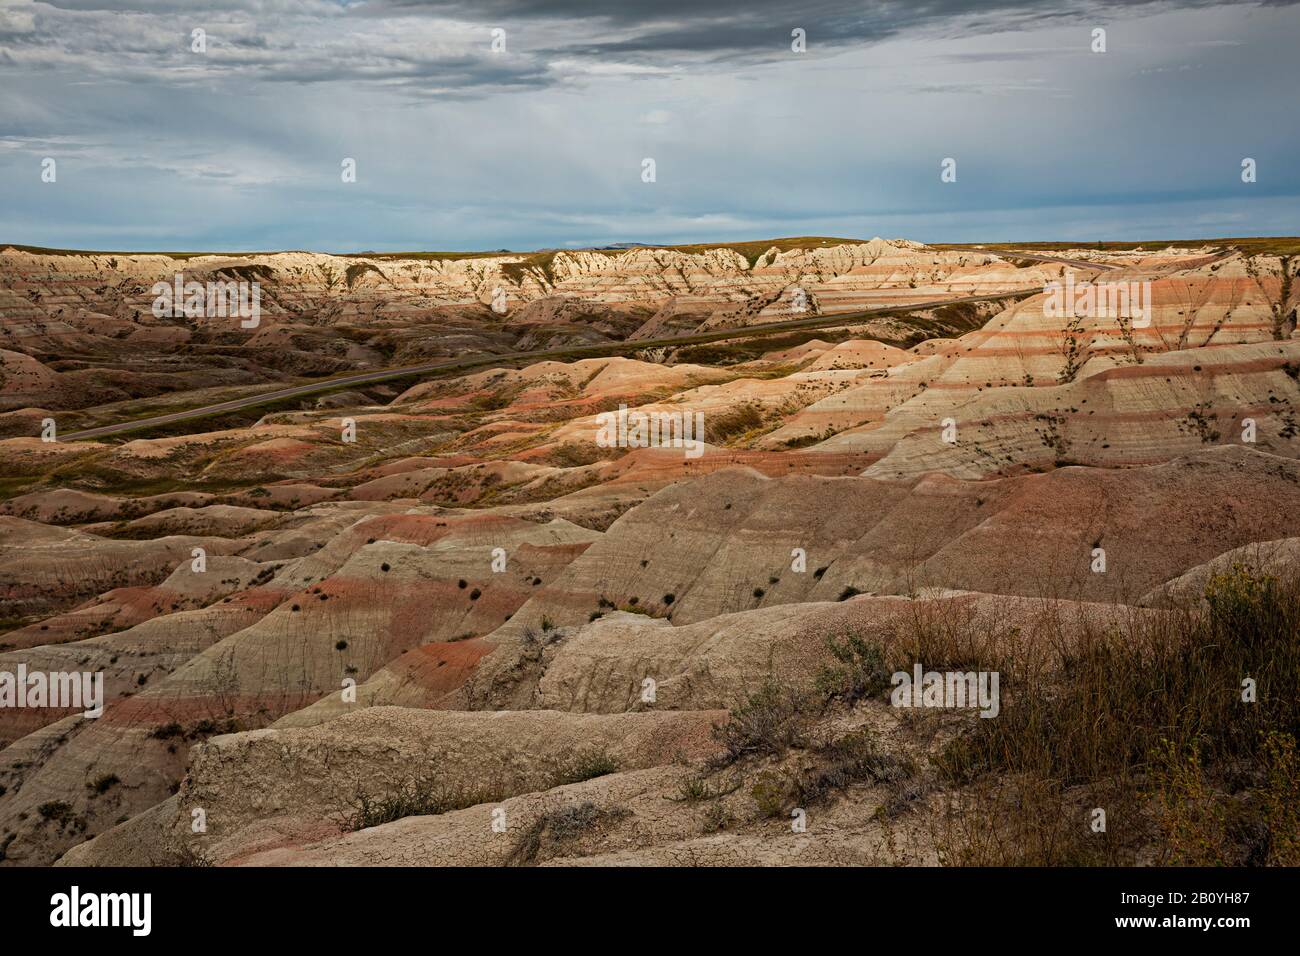 SD00186-00...SOUTH DAKOTA - View of layered buttes and the Badlands Loop Road from Big Foot Pass Overlook in Badlands National Park. Stock Photo